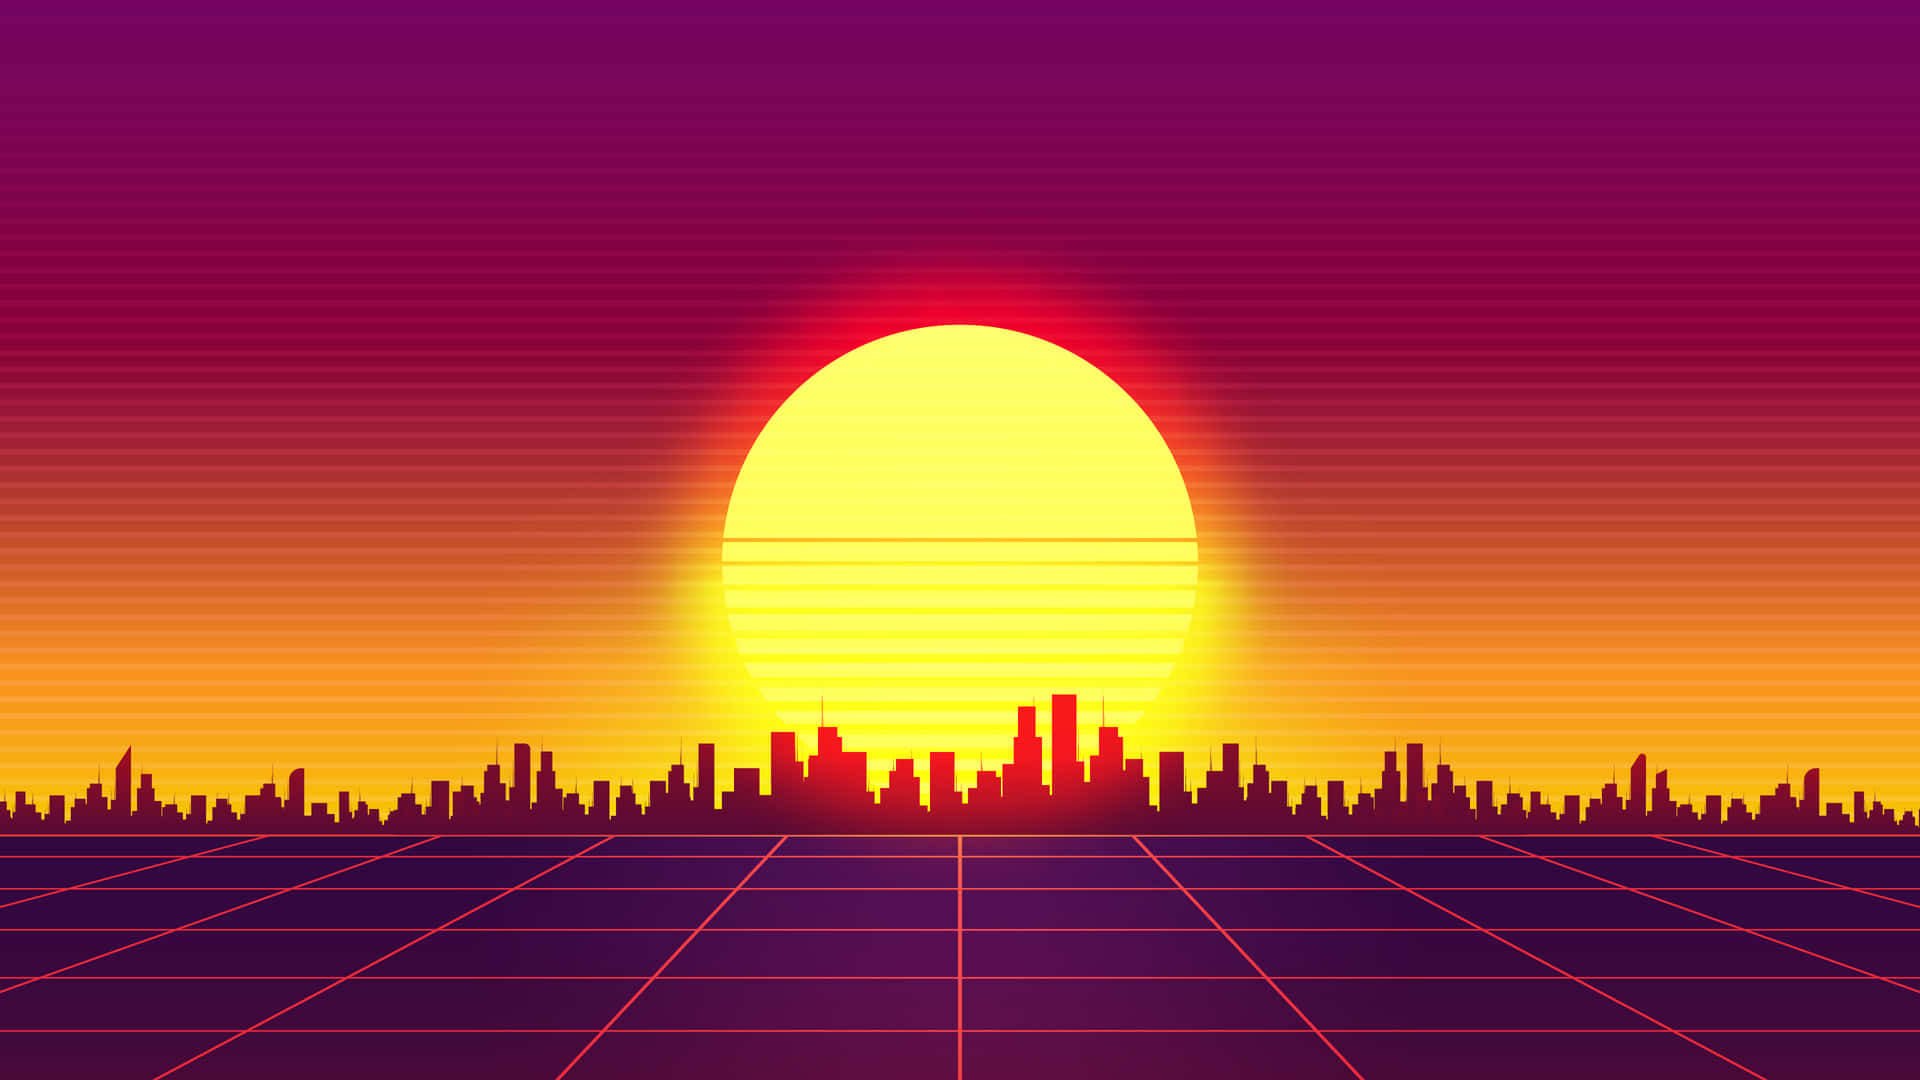 colorful retro backgrounds